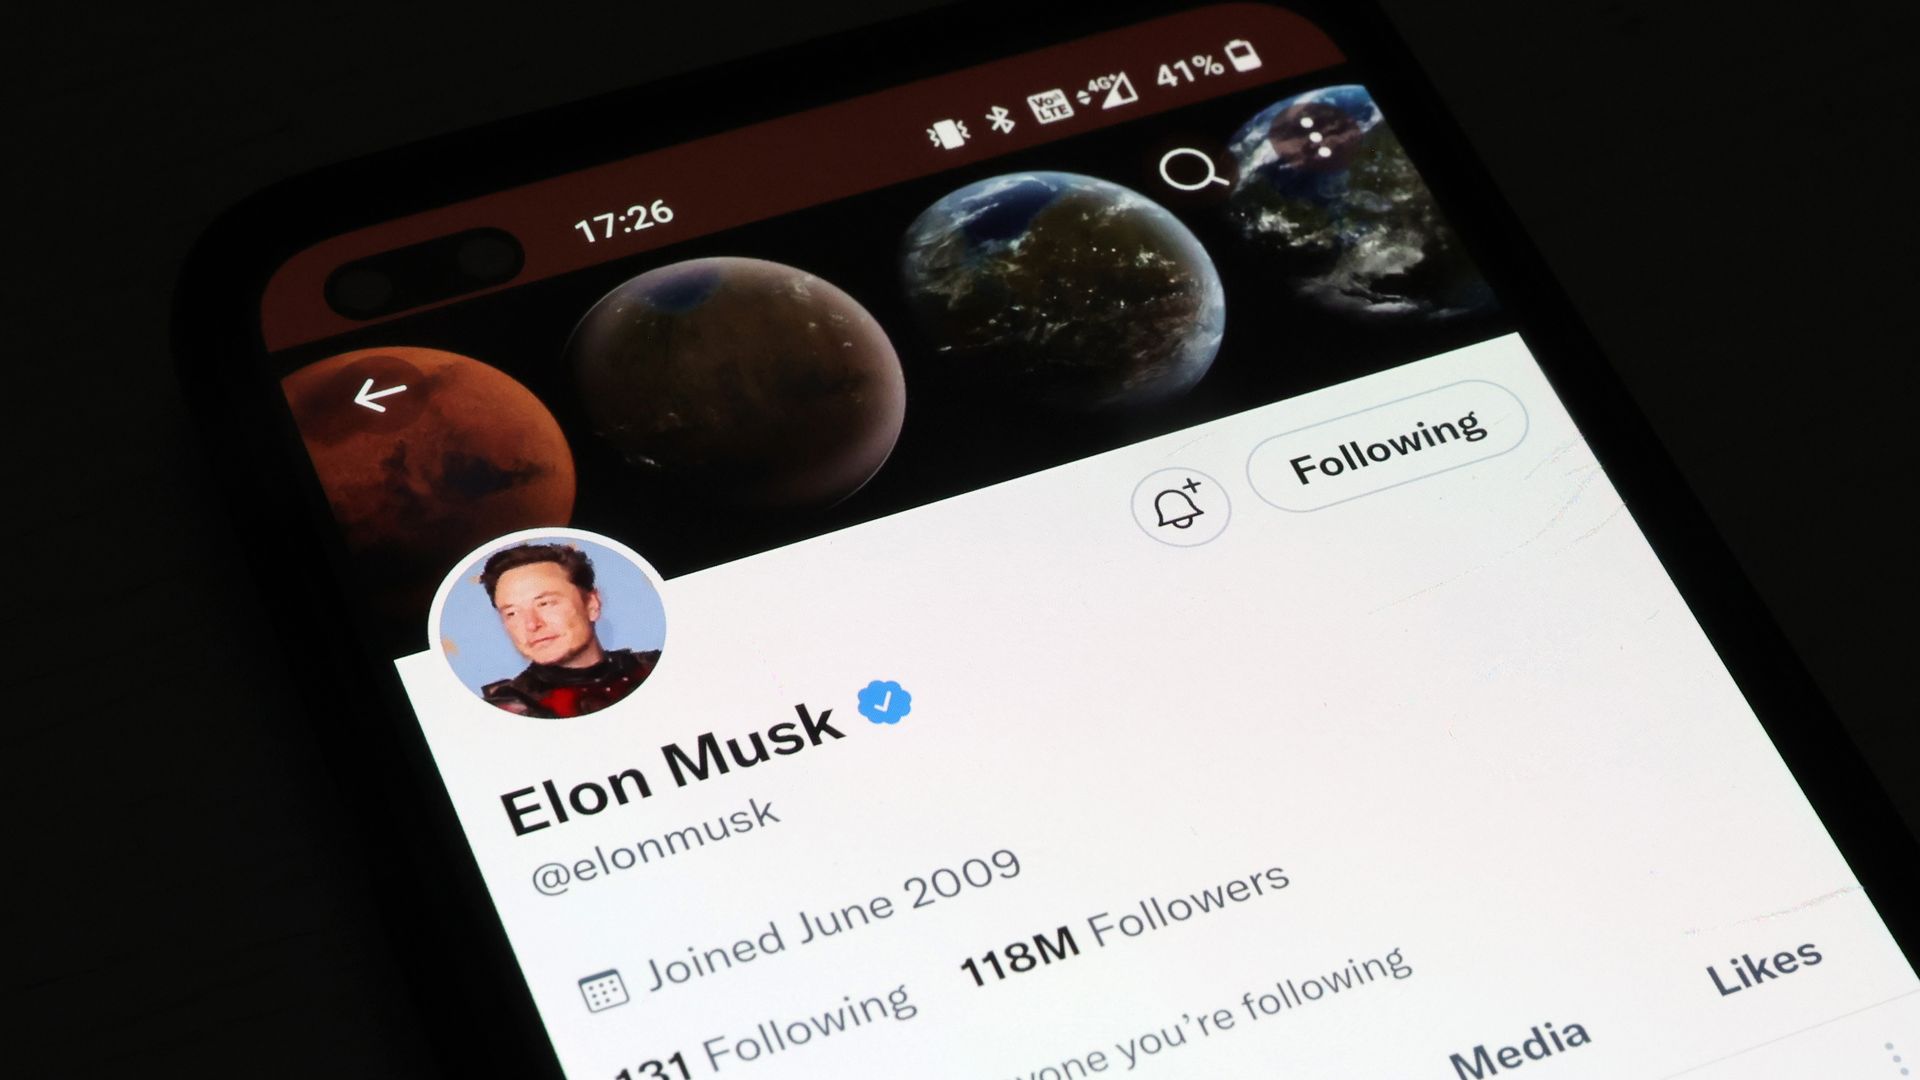 Elon Musk's social media platform X has announced a test subscription that will charge users in two countries /year to post content.